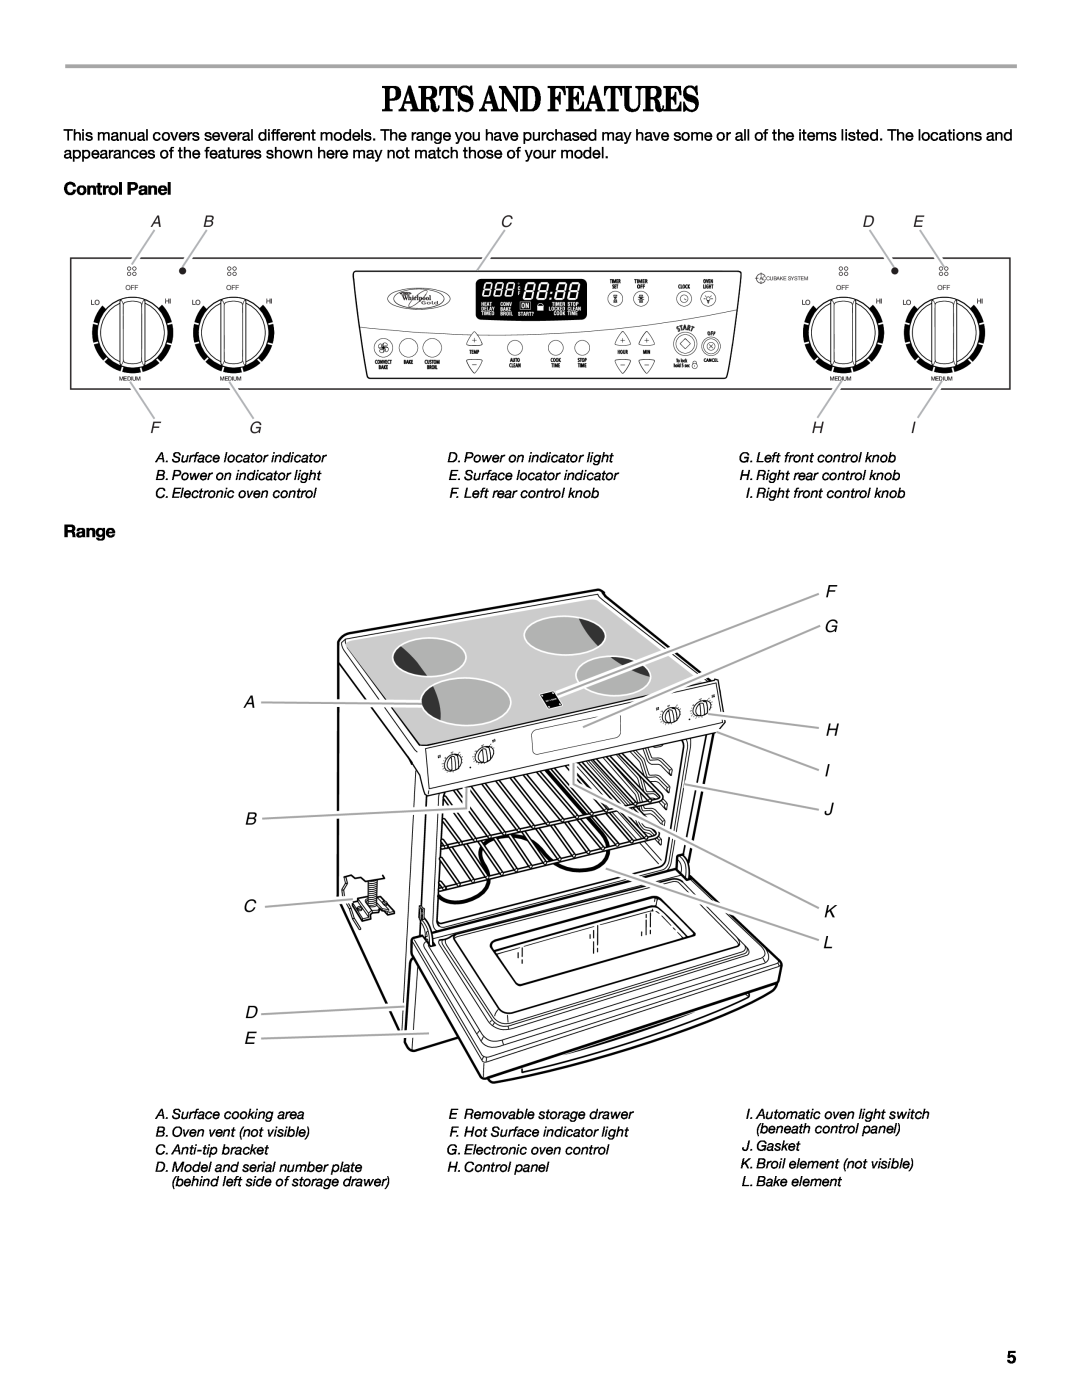 Whirlpool 9762257 manual Parts And Features, Control Panel, Range, A B C D E, F G H I J K L 